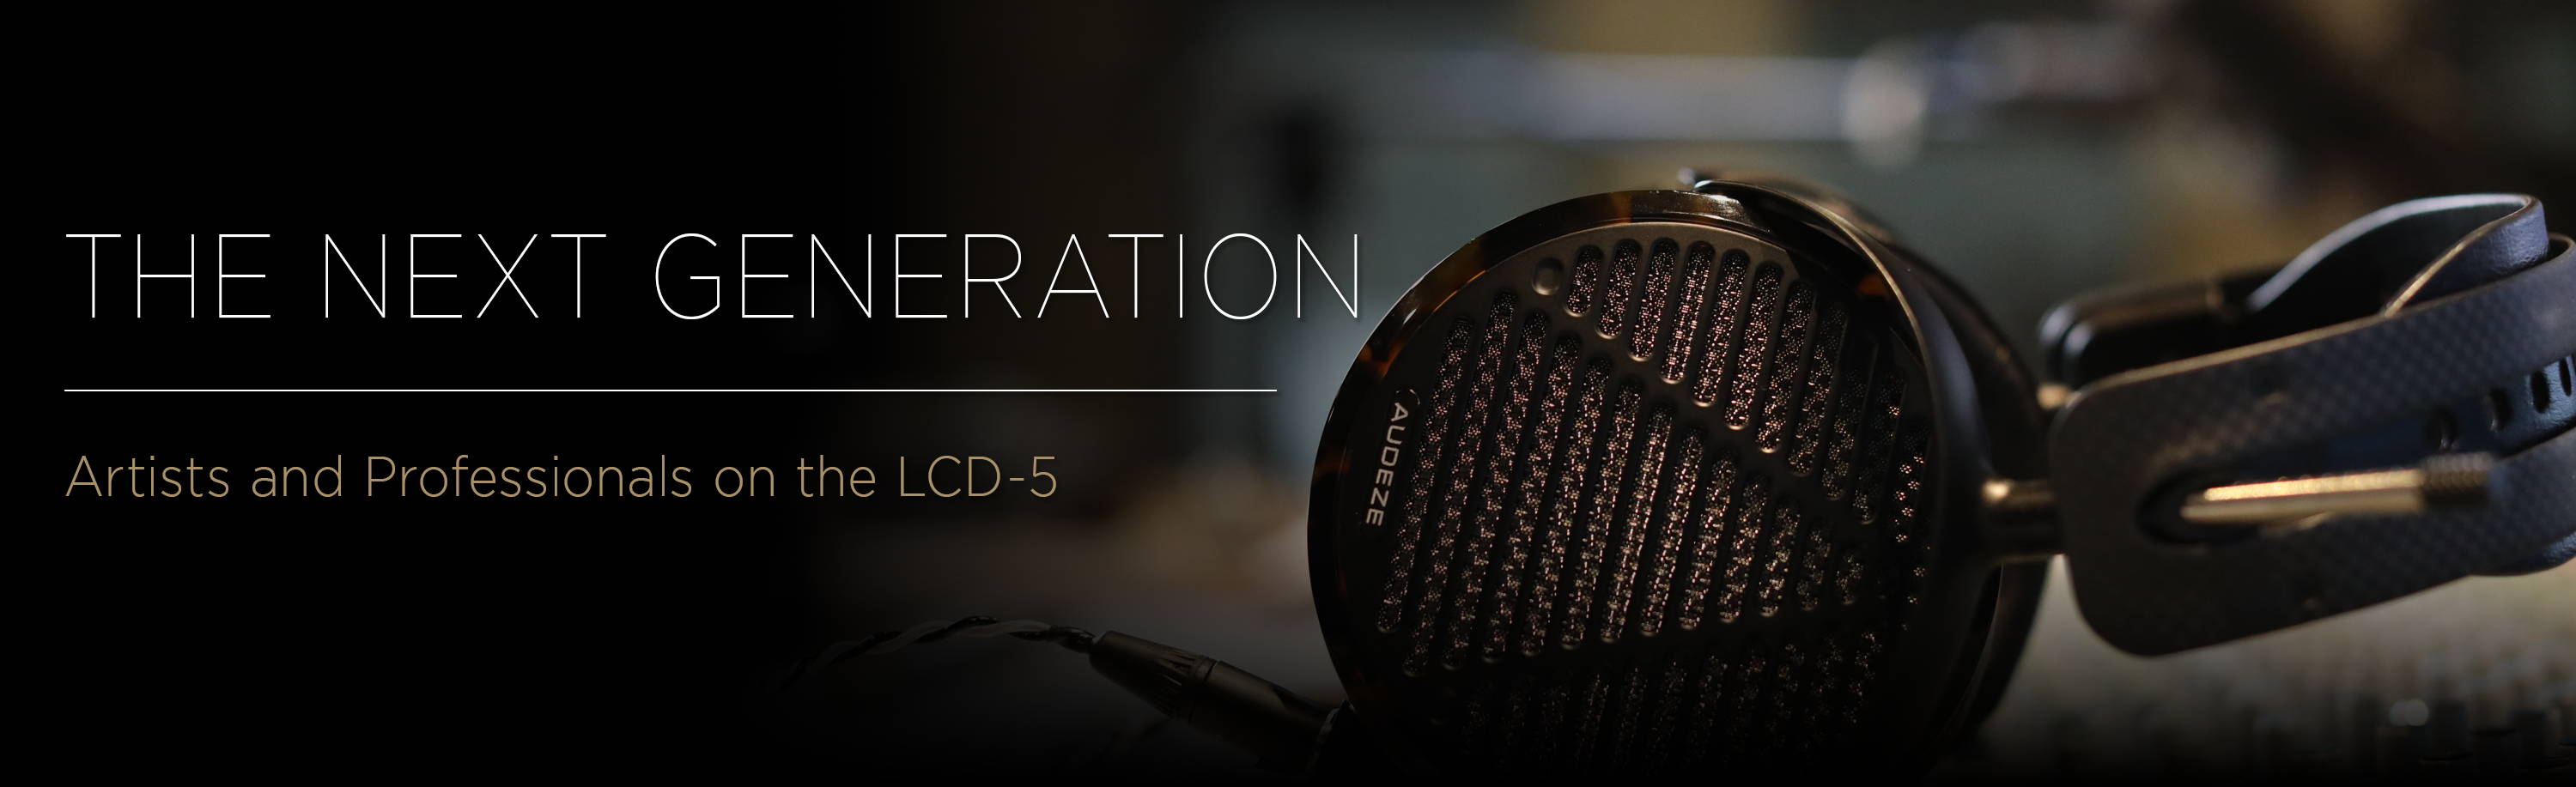 LCD-5, The next generation of planar magnetic headphones